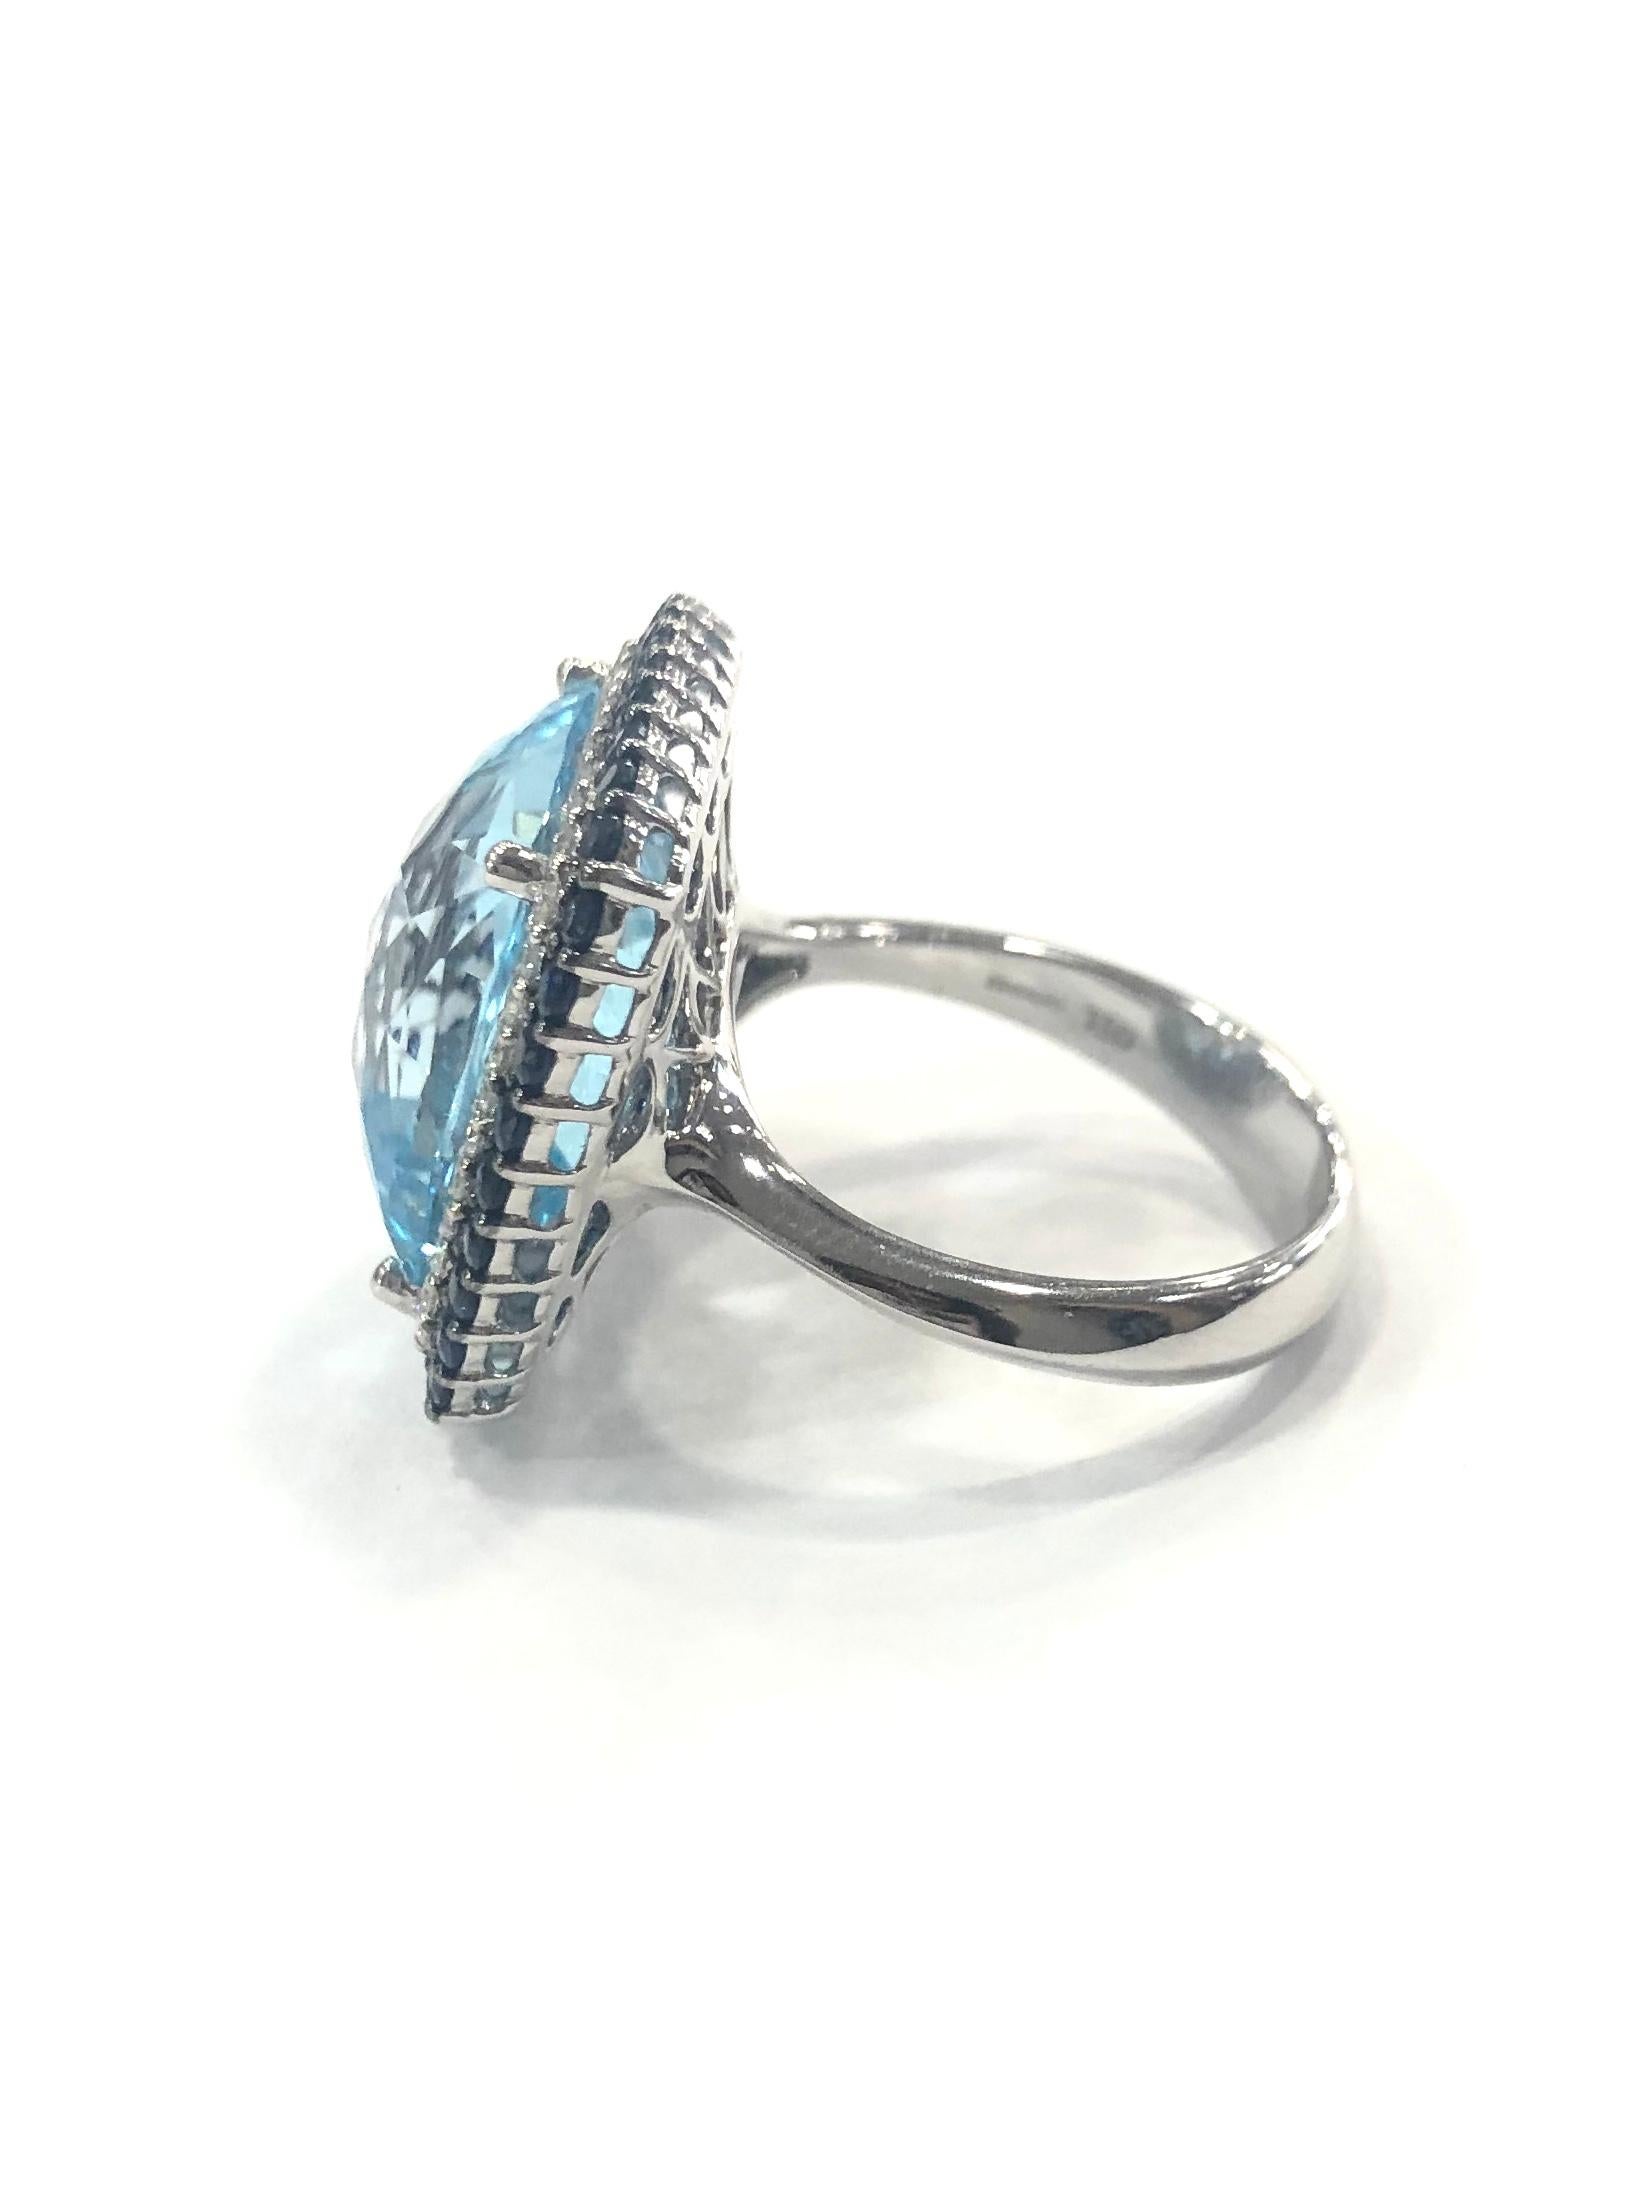 18ct White Gold Blue Topaz, Sapphire and Diamond Cluster Cocktail Ring. Set with a large central cushion shape Blue Topaz surrounded by a row of forty two round brilliant cut Diamonds and a row of thirty six good colour natural blue Sapphires.
Set